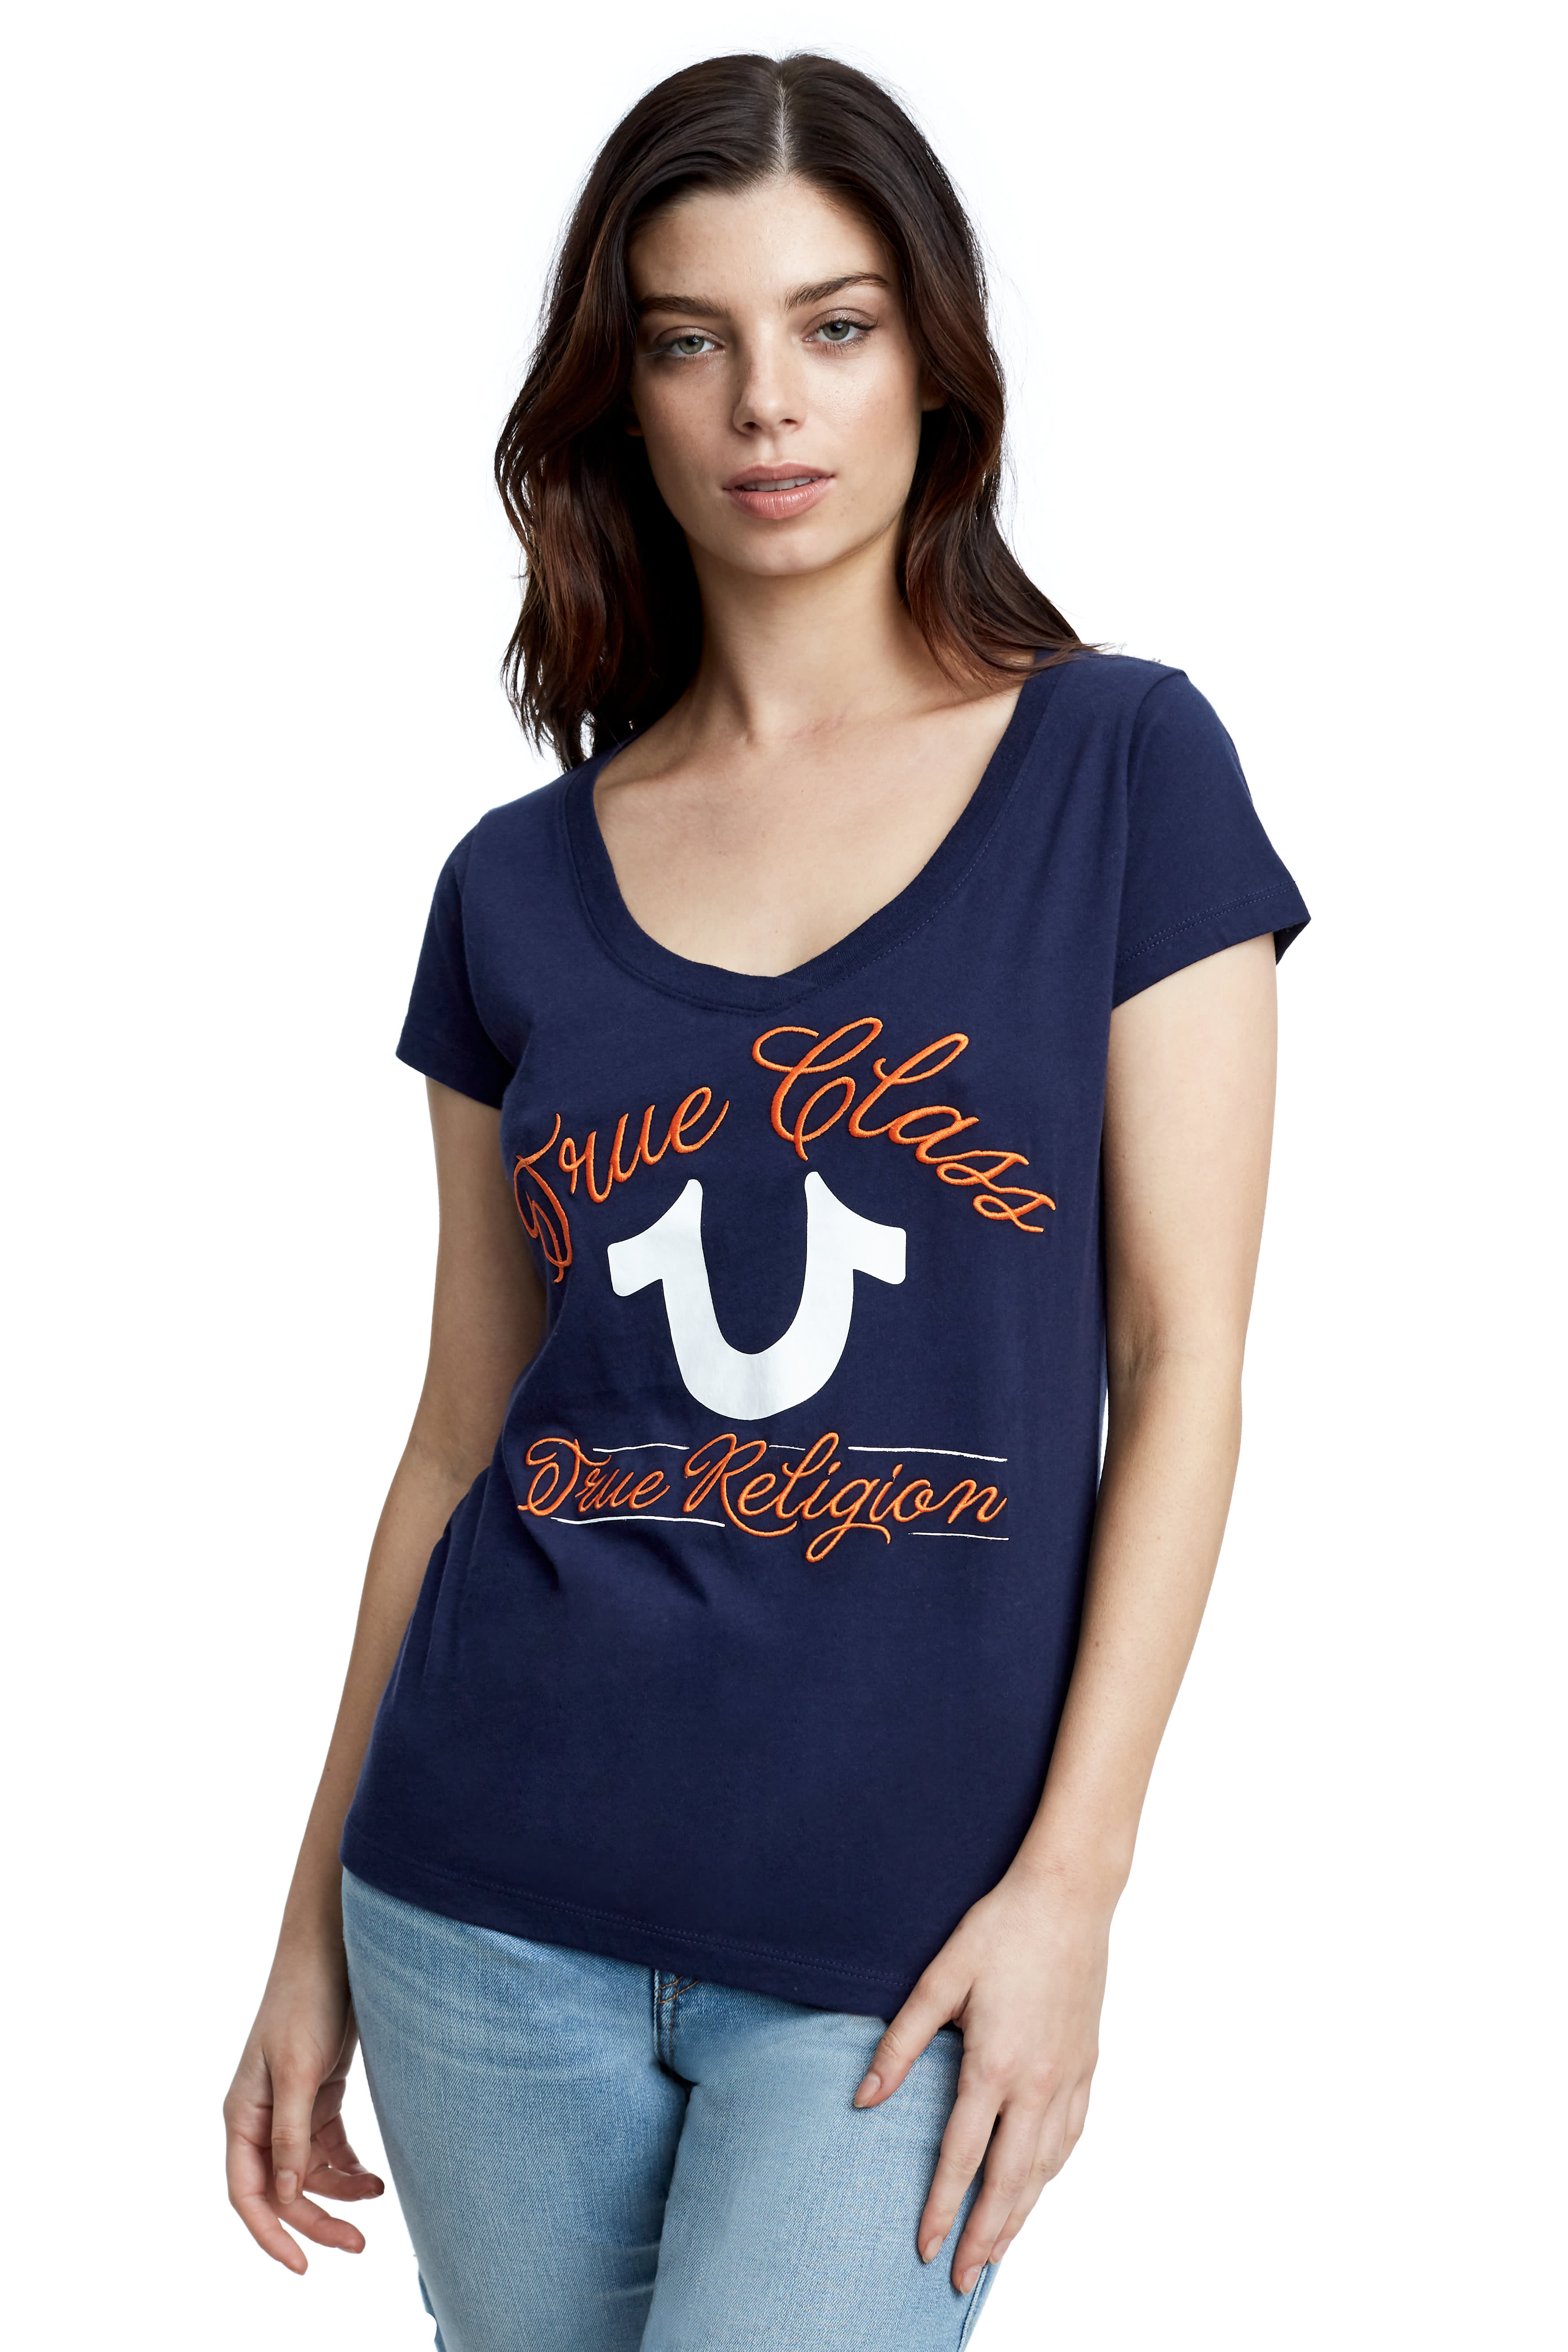 TRUE CLASS EMBROIDERED WOMENS V NECK TEE